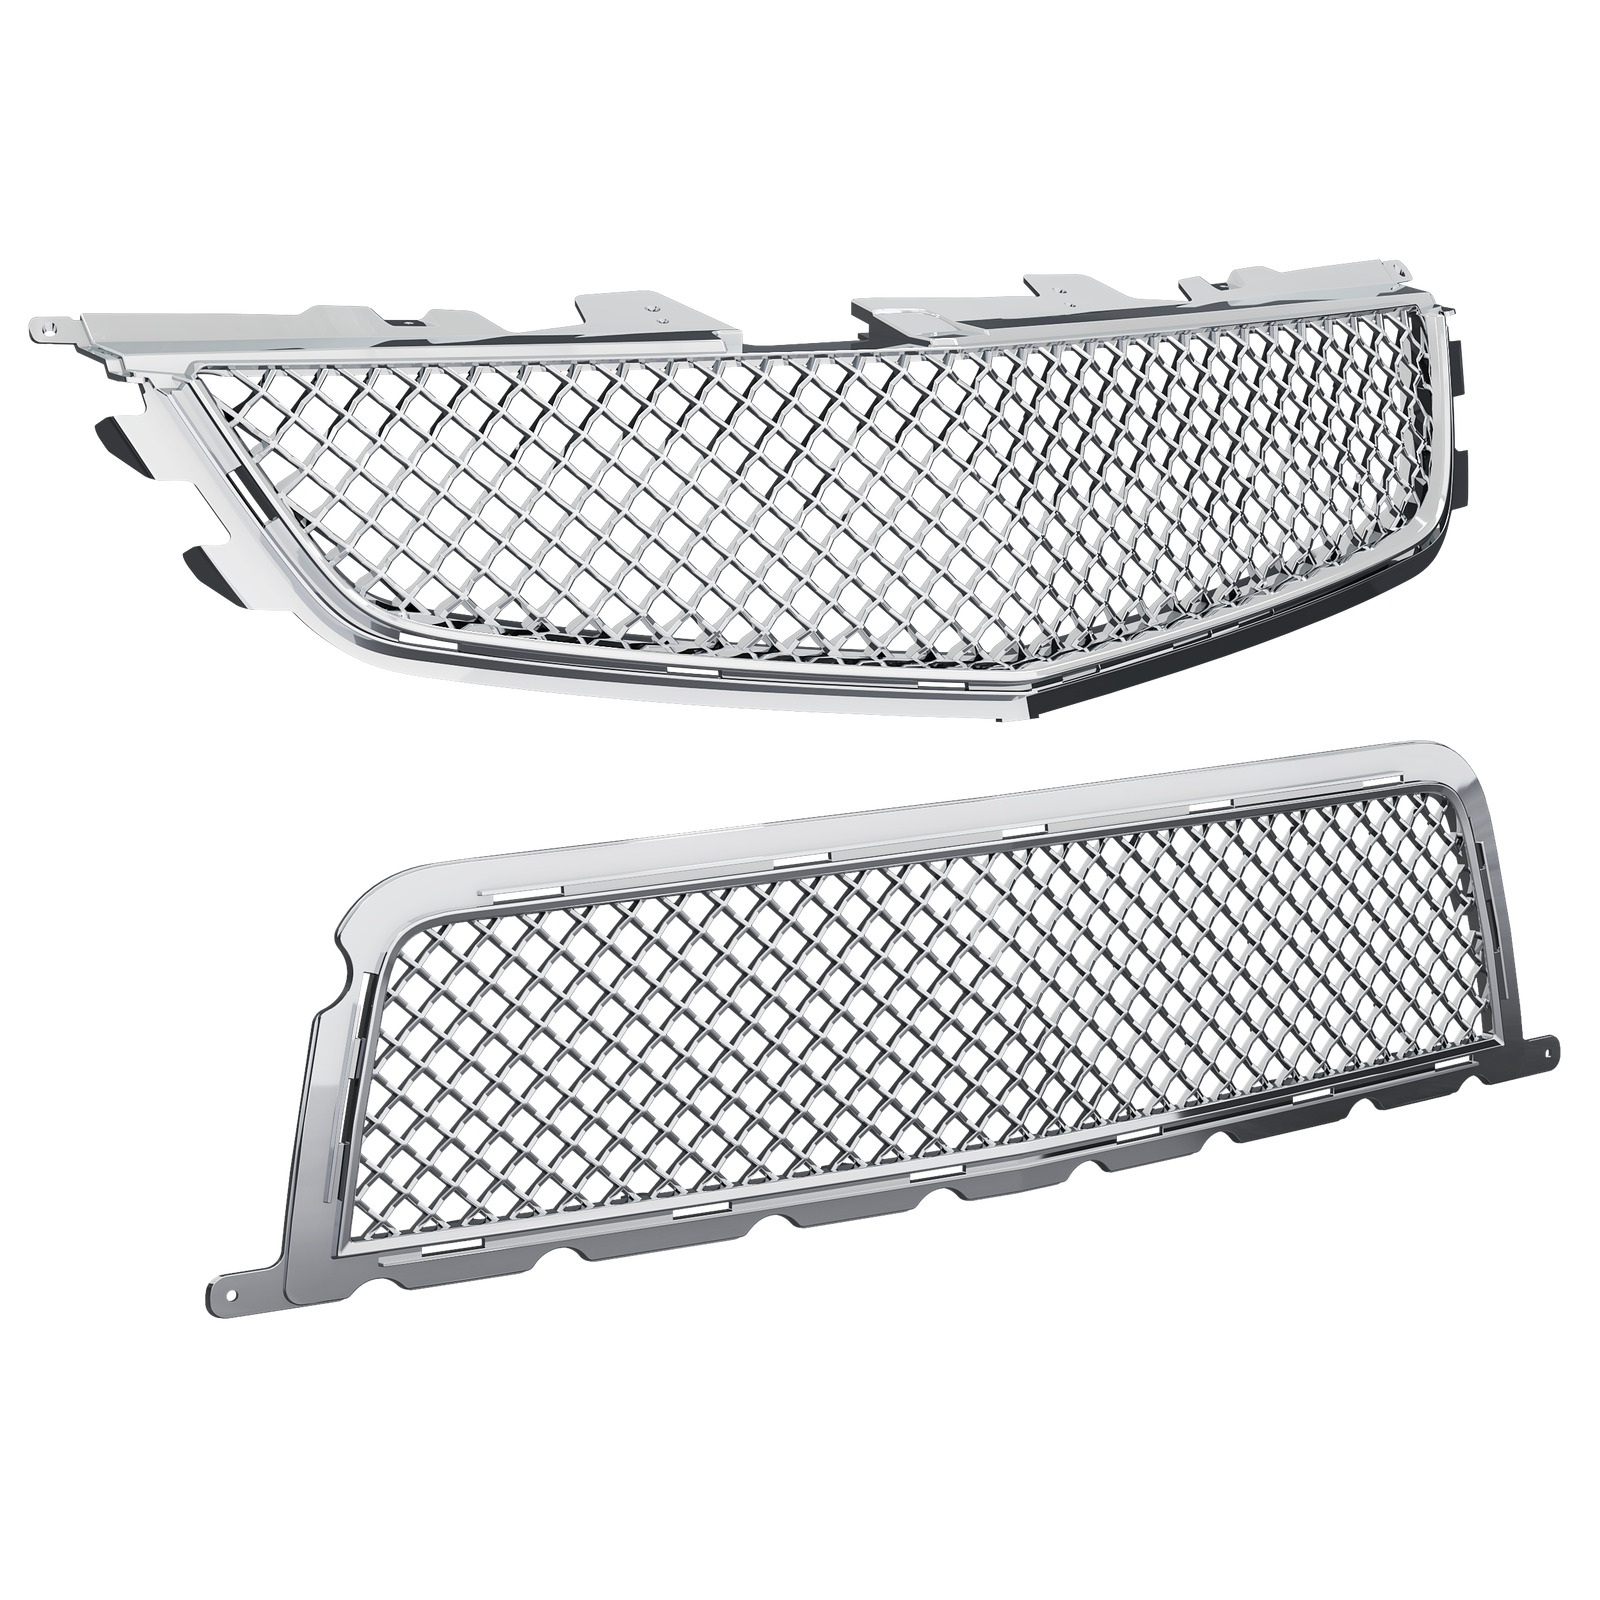 New Chrome Front Upper & Lower Grille For Cadillac CTS CTS-V 2009-2014 Honeycomb